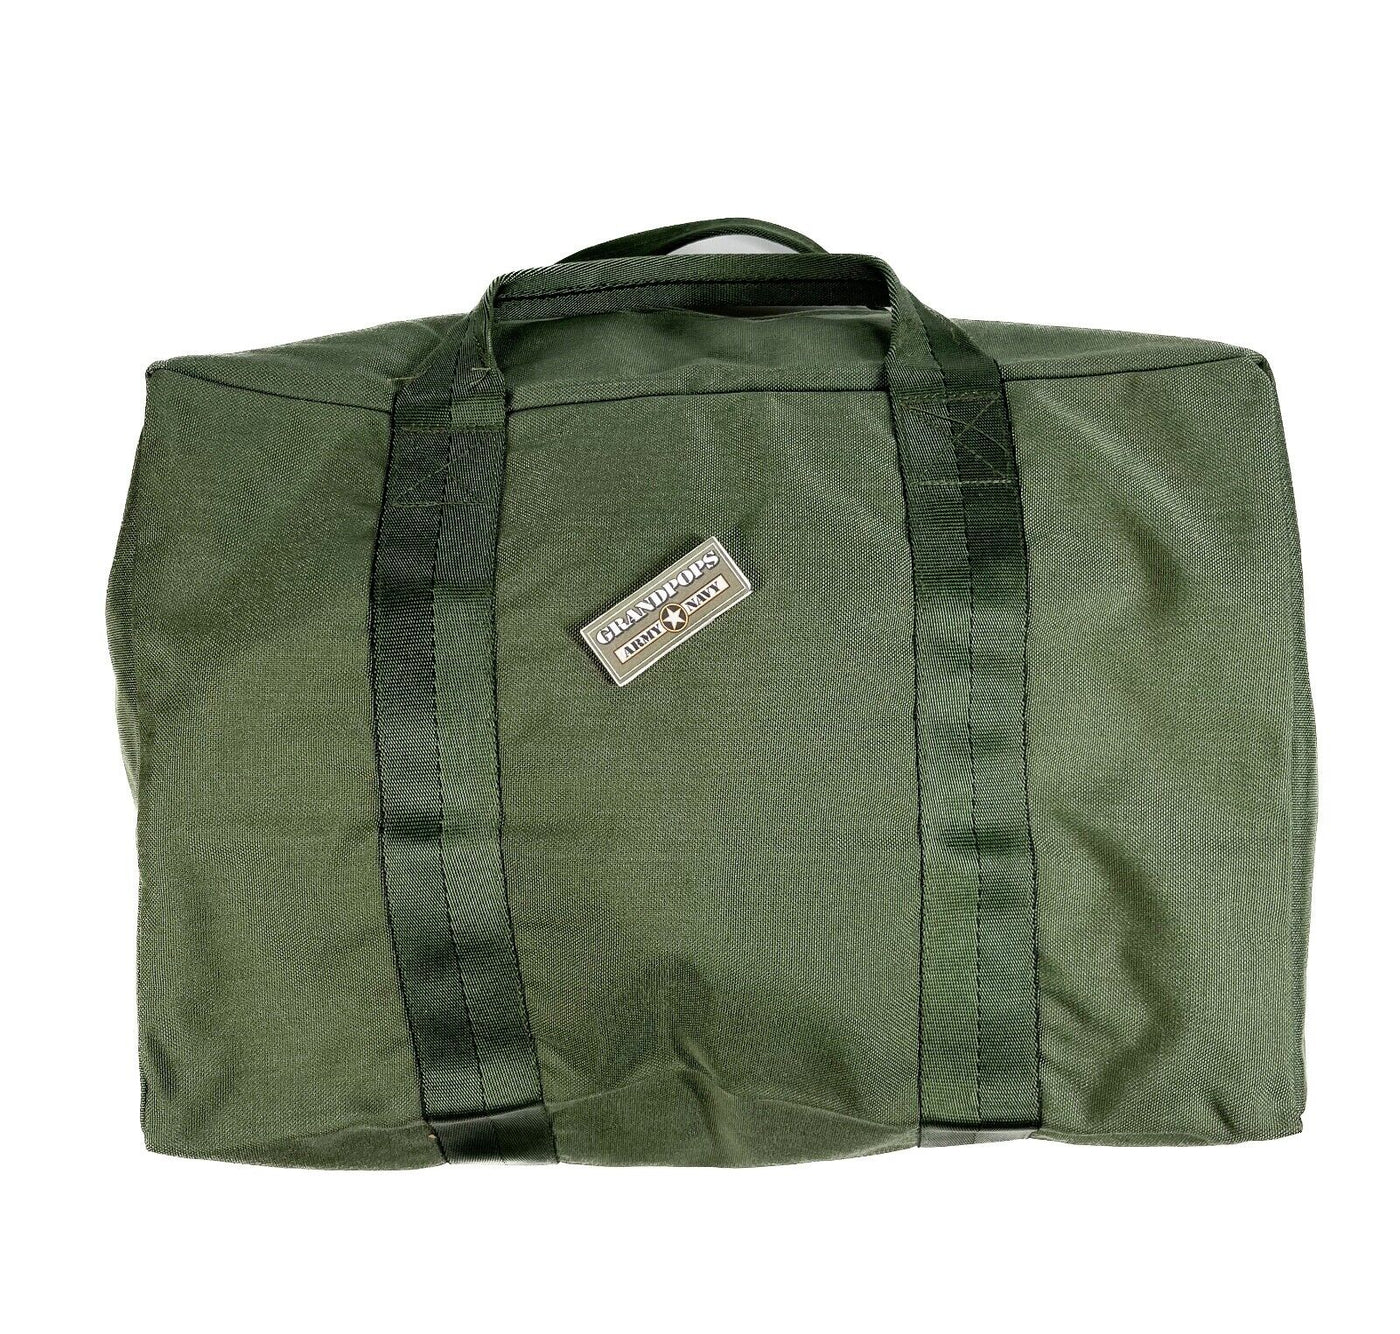 DRAKENSBERG Duffle bag »Cody« forest-Green, waxed canvas